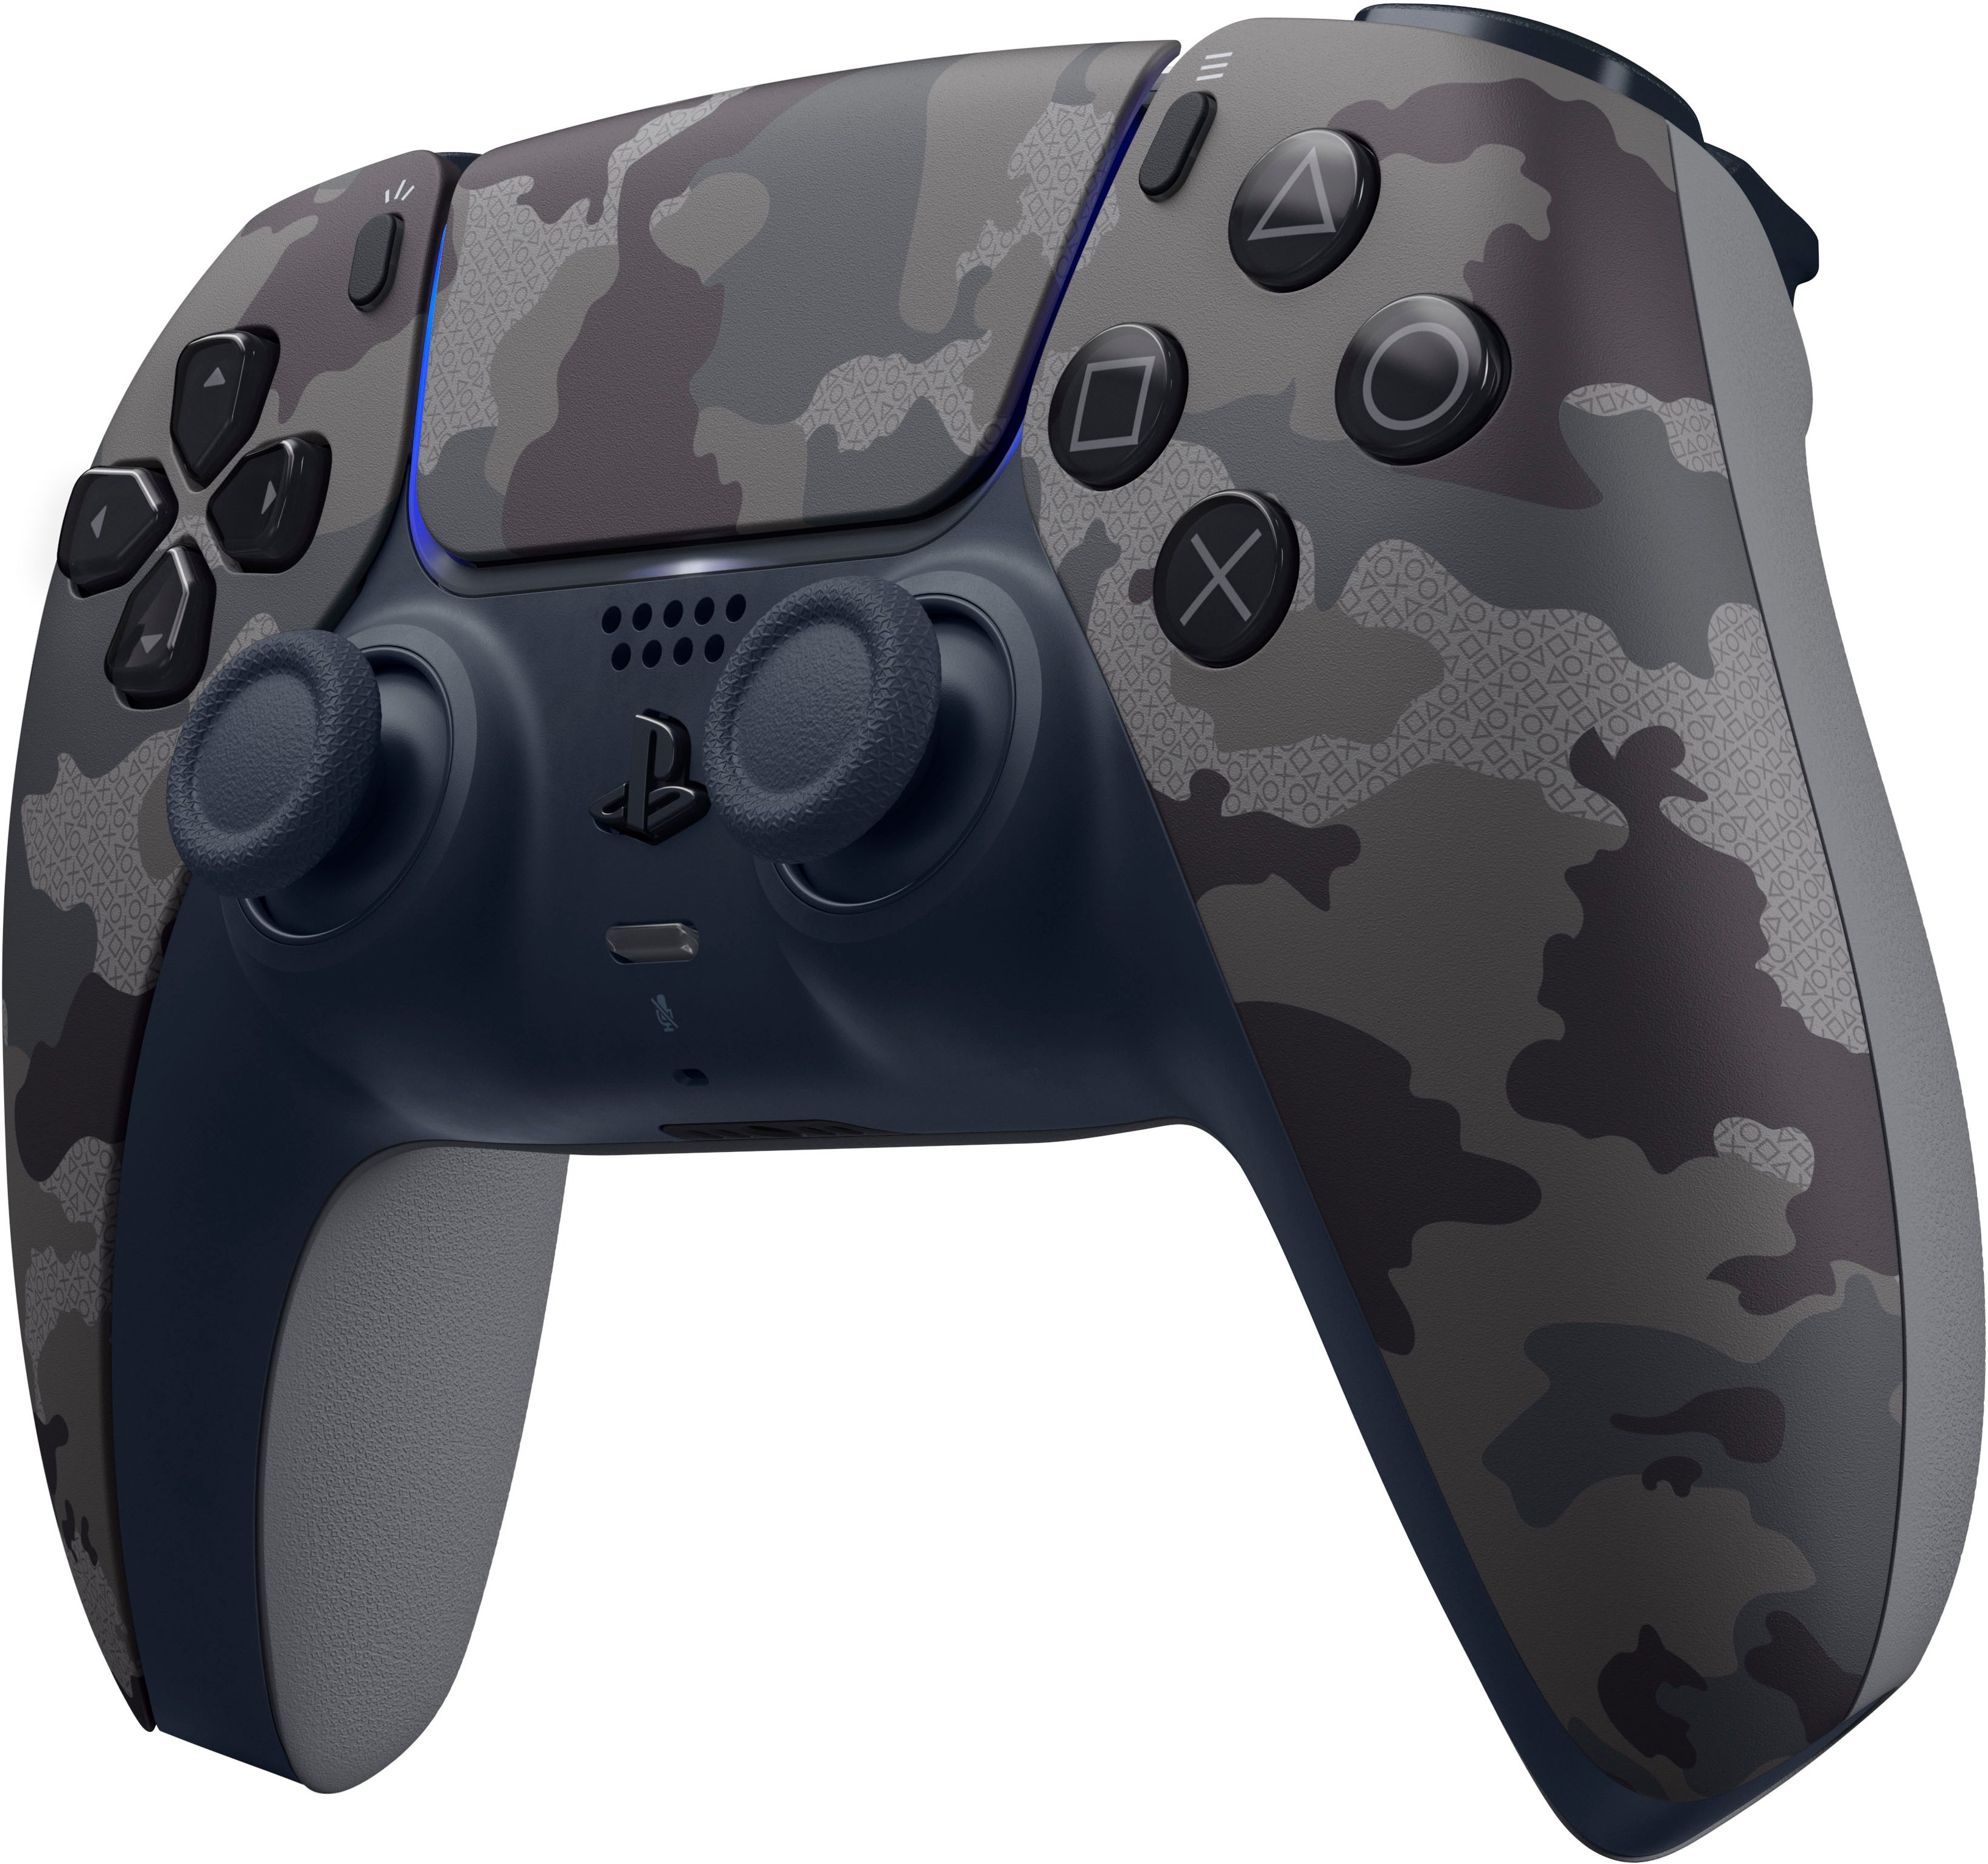 Angle View: Sony - PlayStation 5 - DualSense Wireless Controller - Gray Camouflage